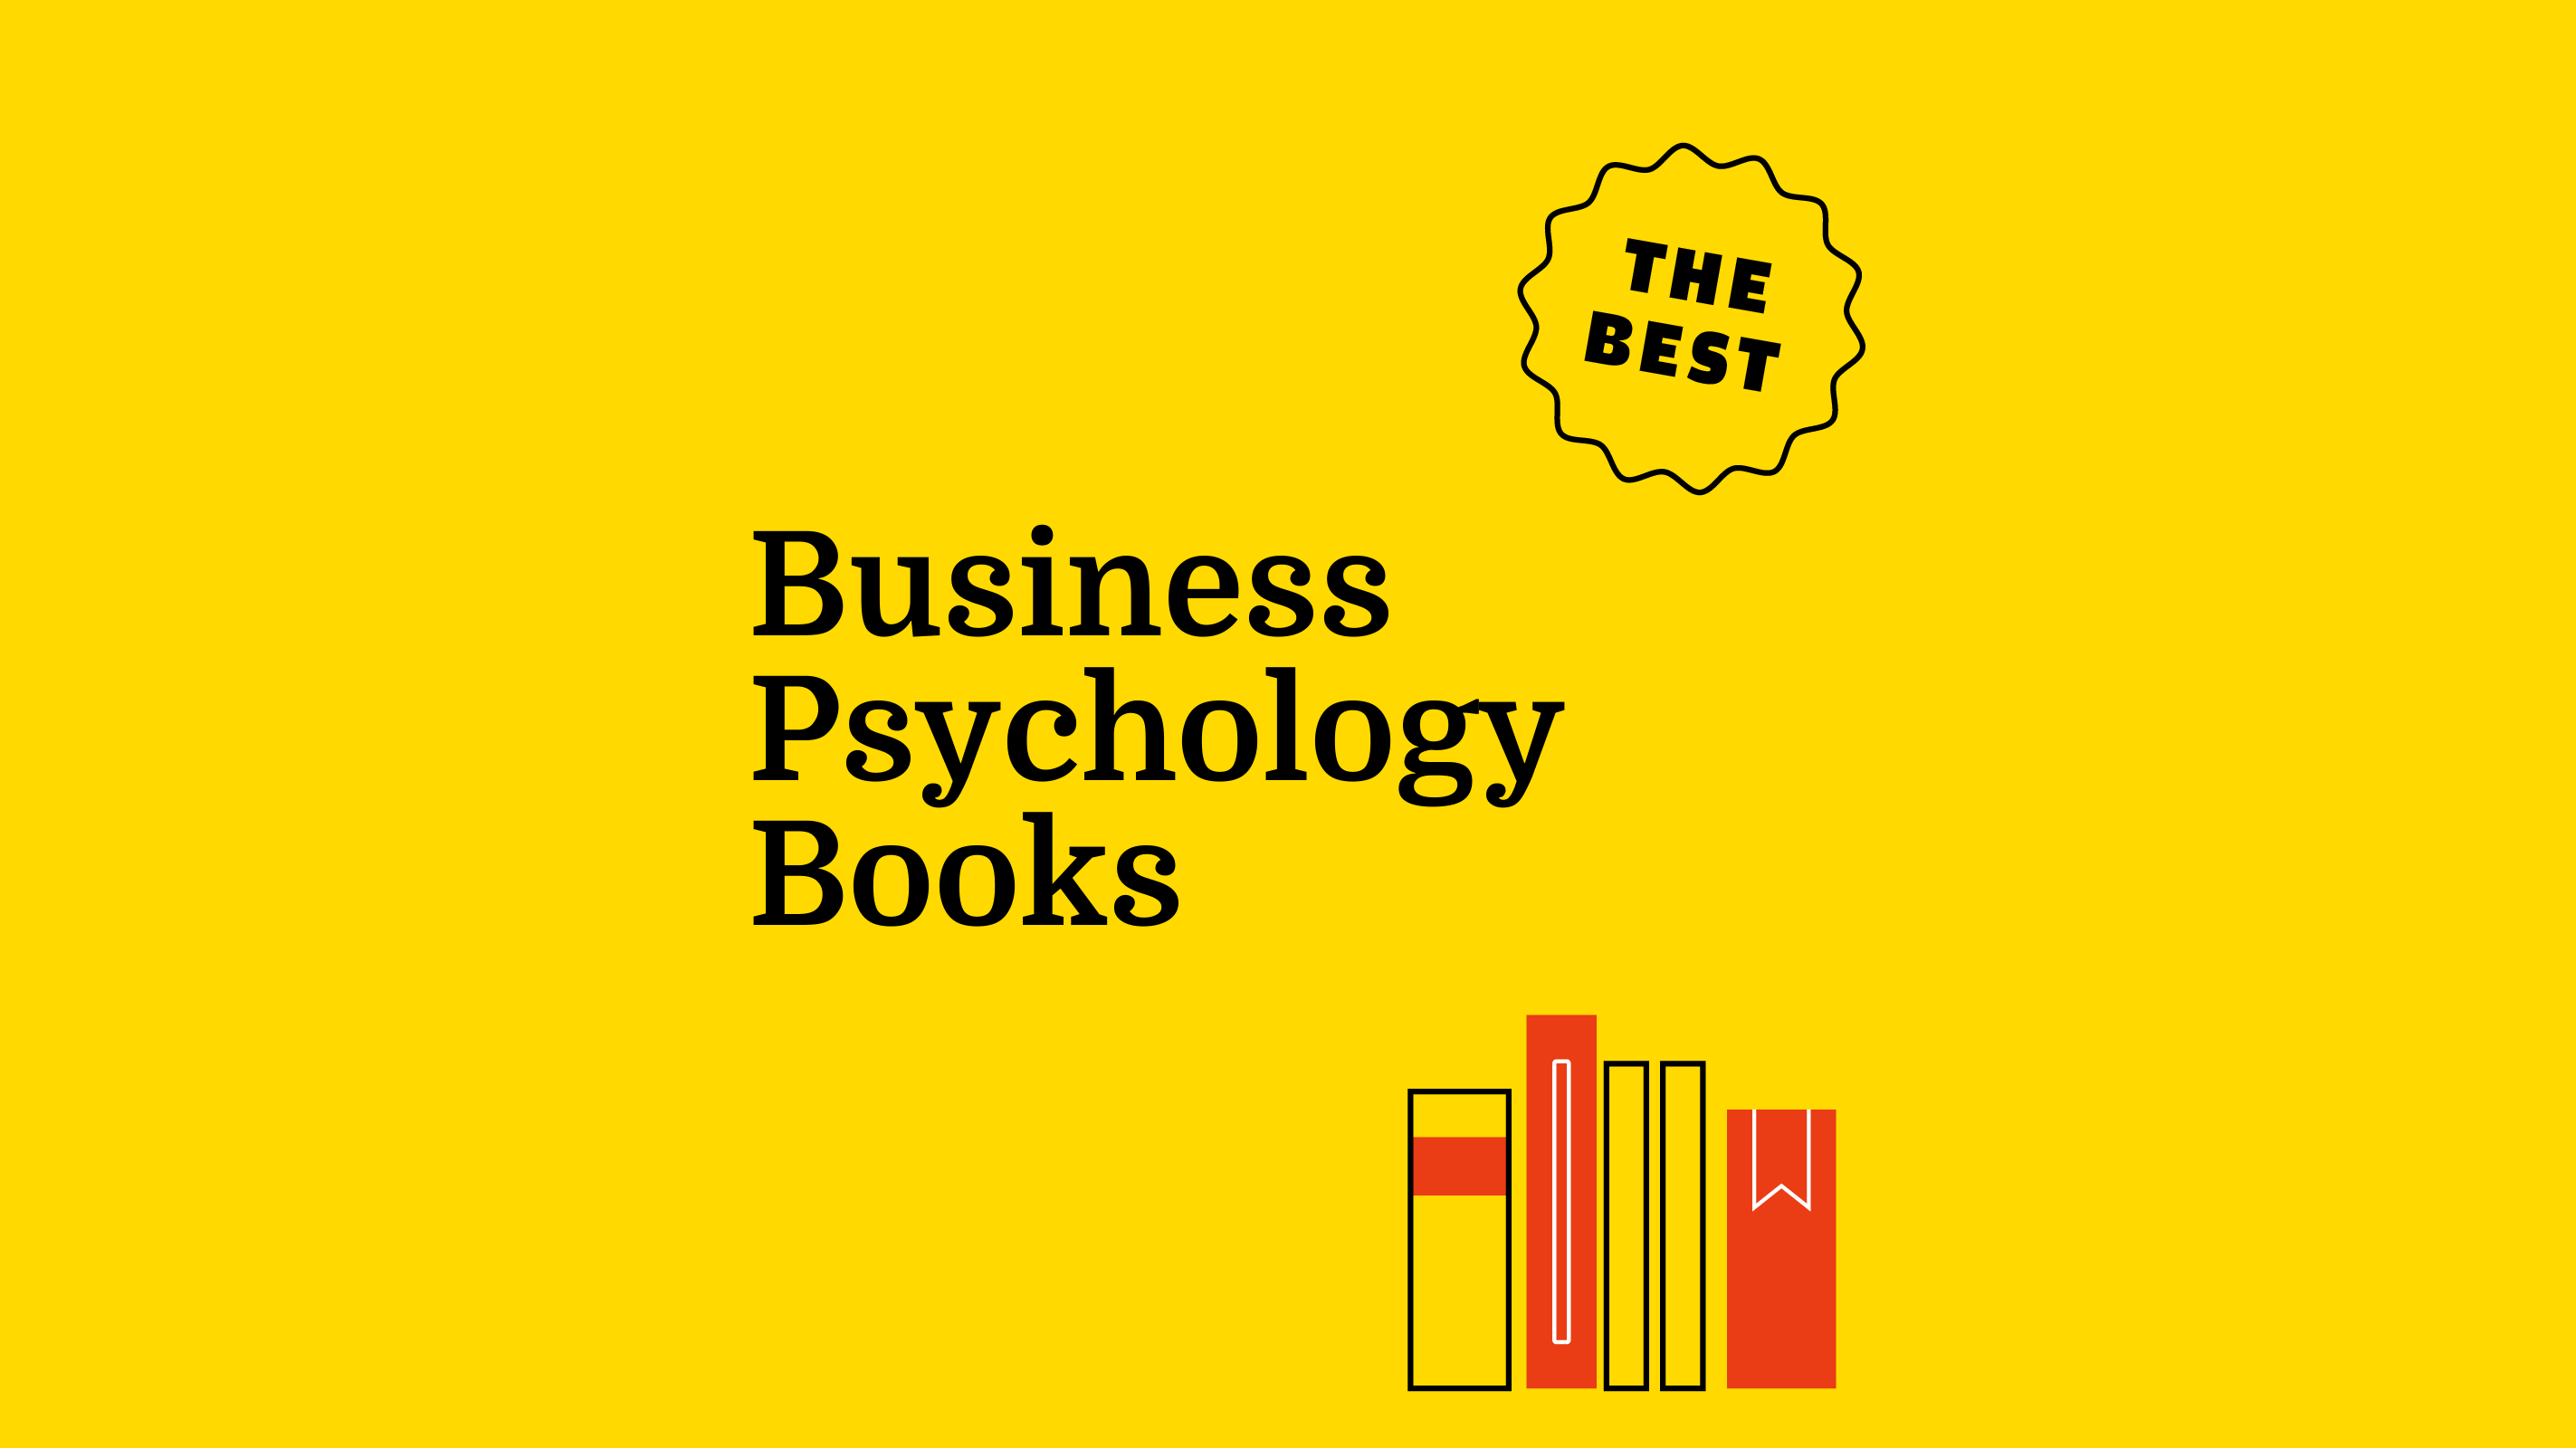 Influence by Robert B. Cialdini - Read Online  Psychology books, Business  books, Business essentials